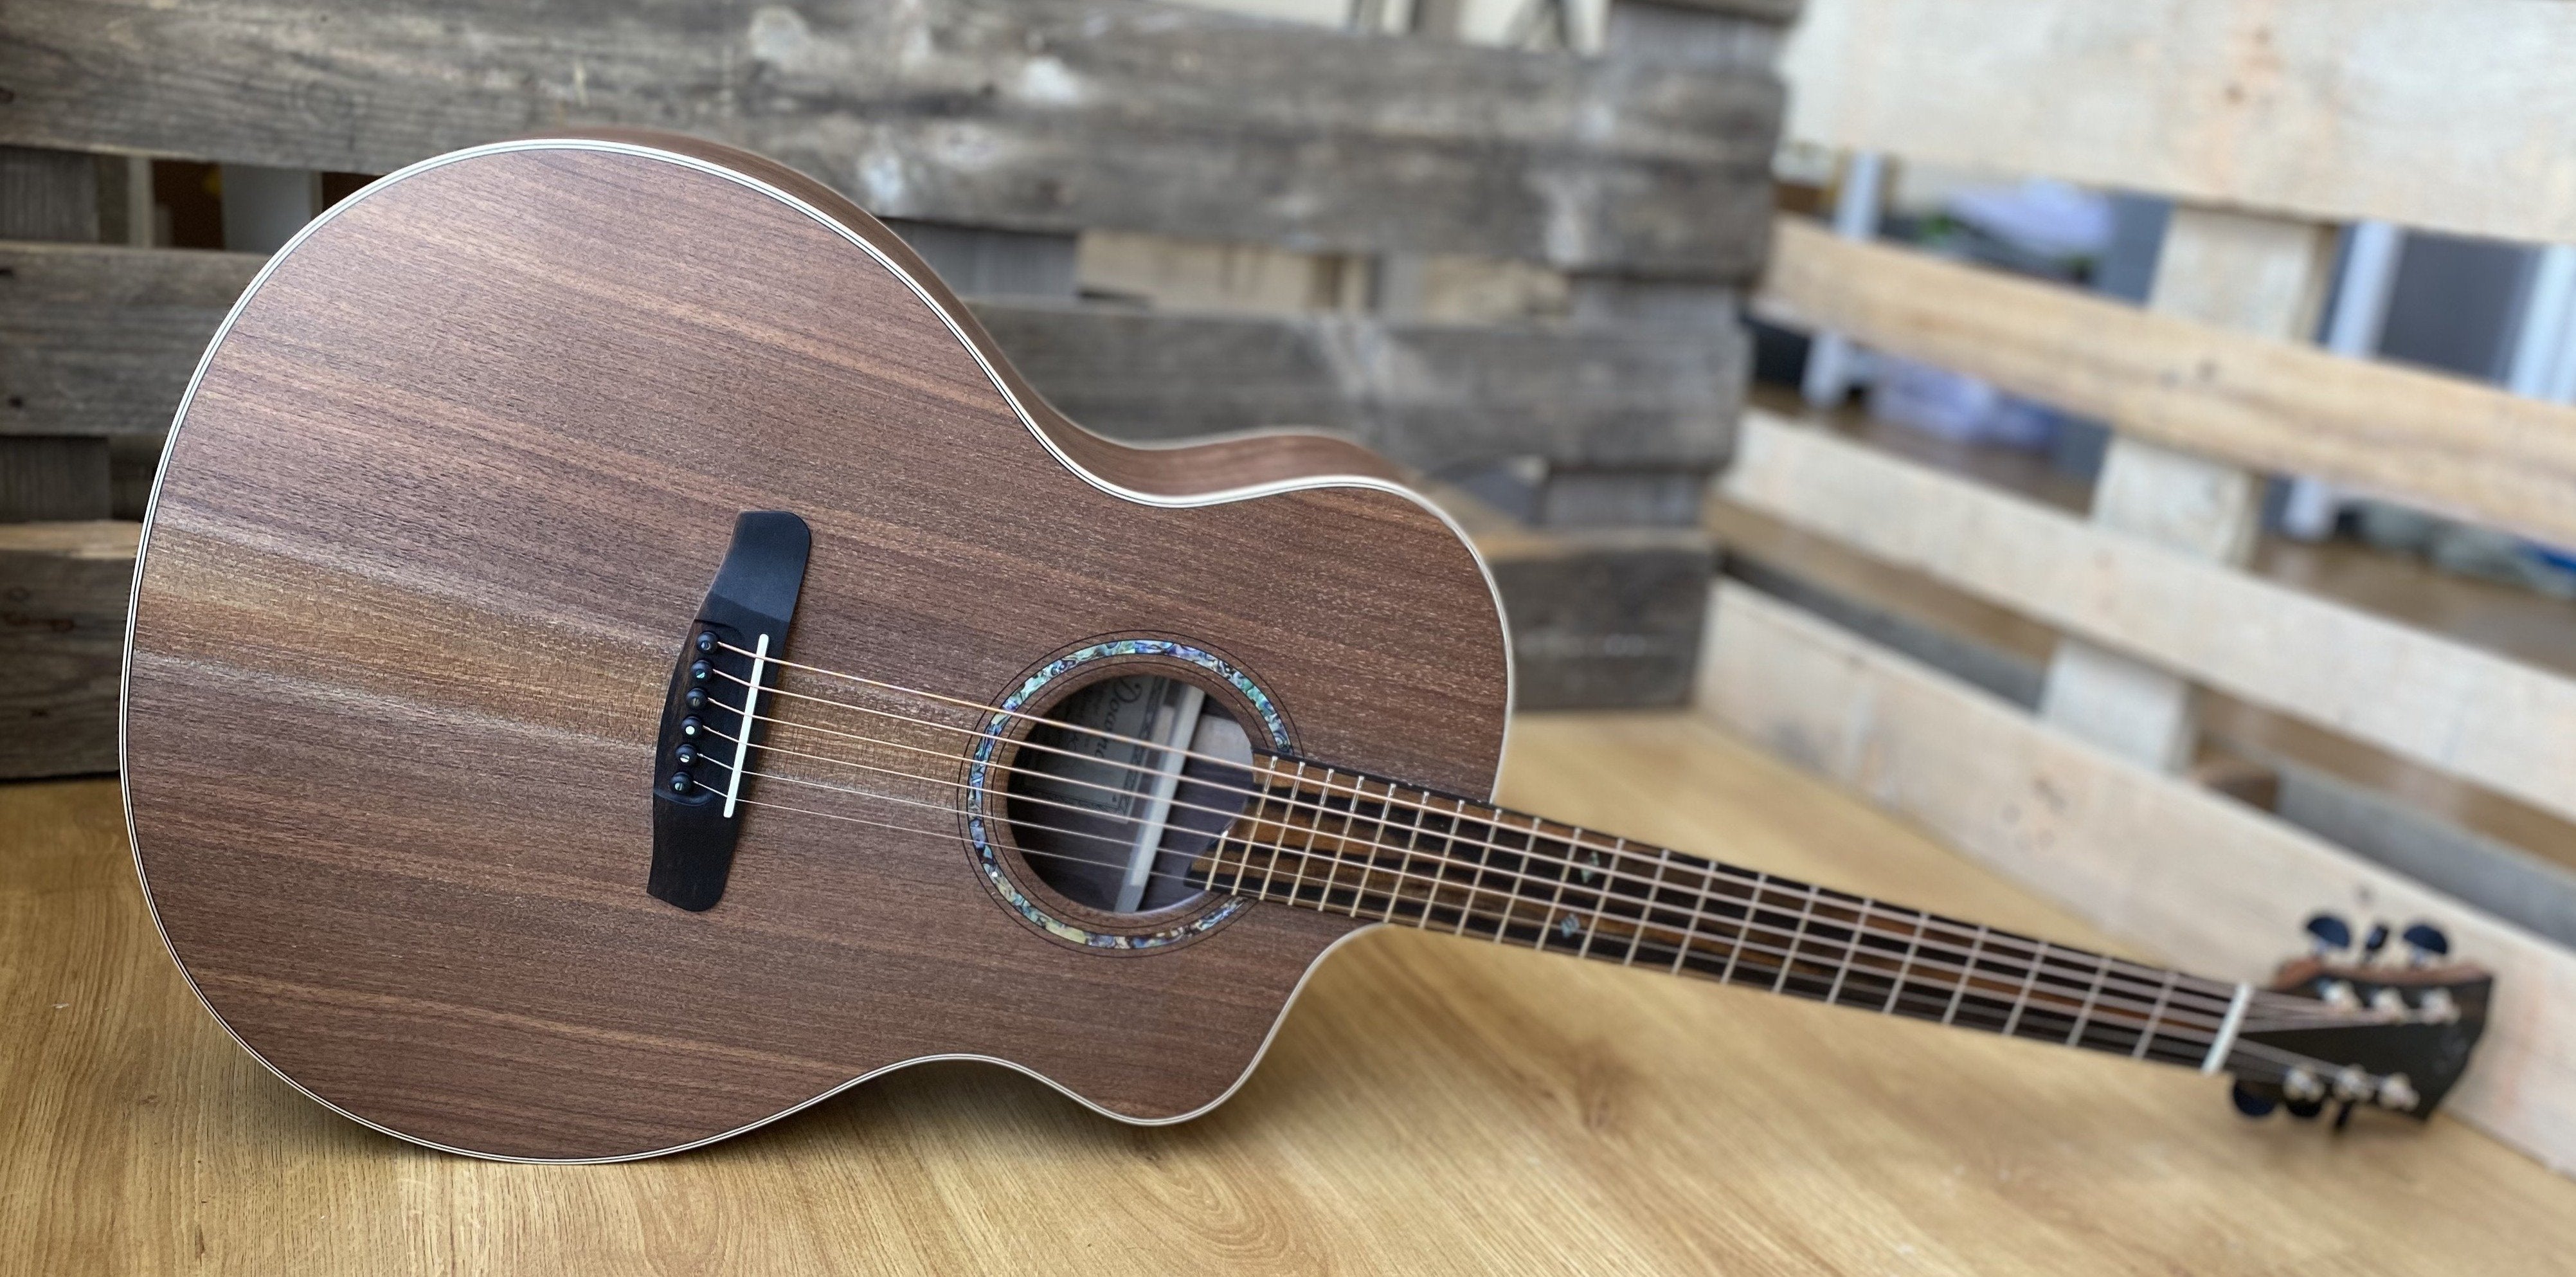 Dowina Walnut Tribute GAC, Acoustic Guitar for sale at Richards Guitars.